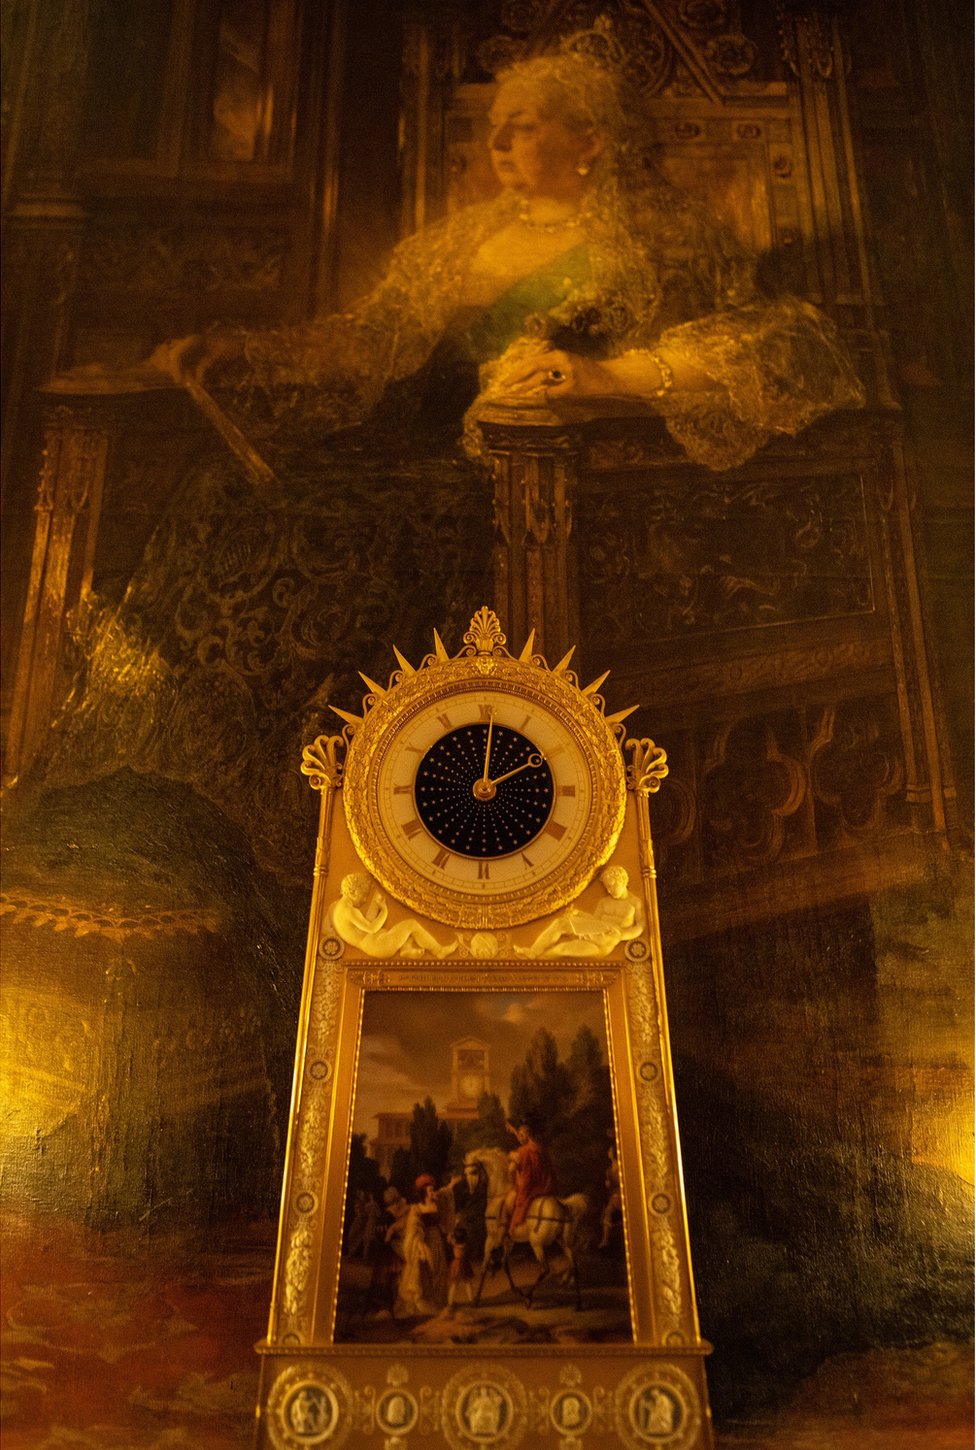 A beautiful clock with a large portrait of Queen Victoria behind it